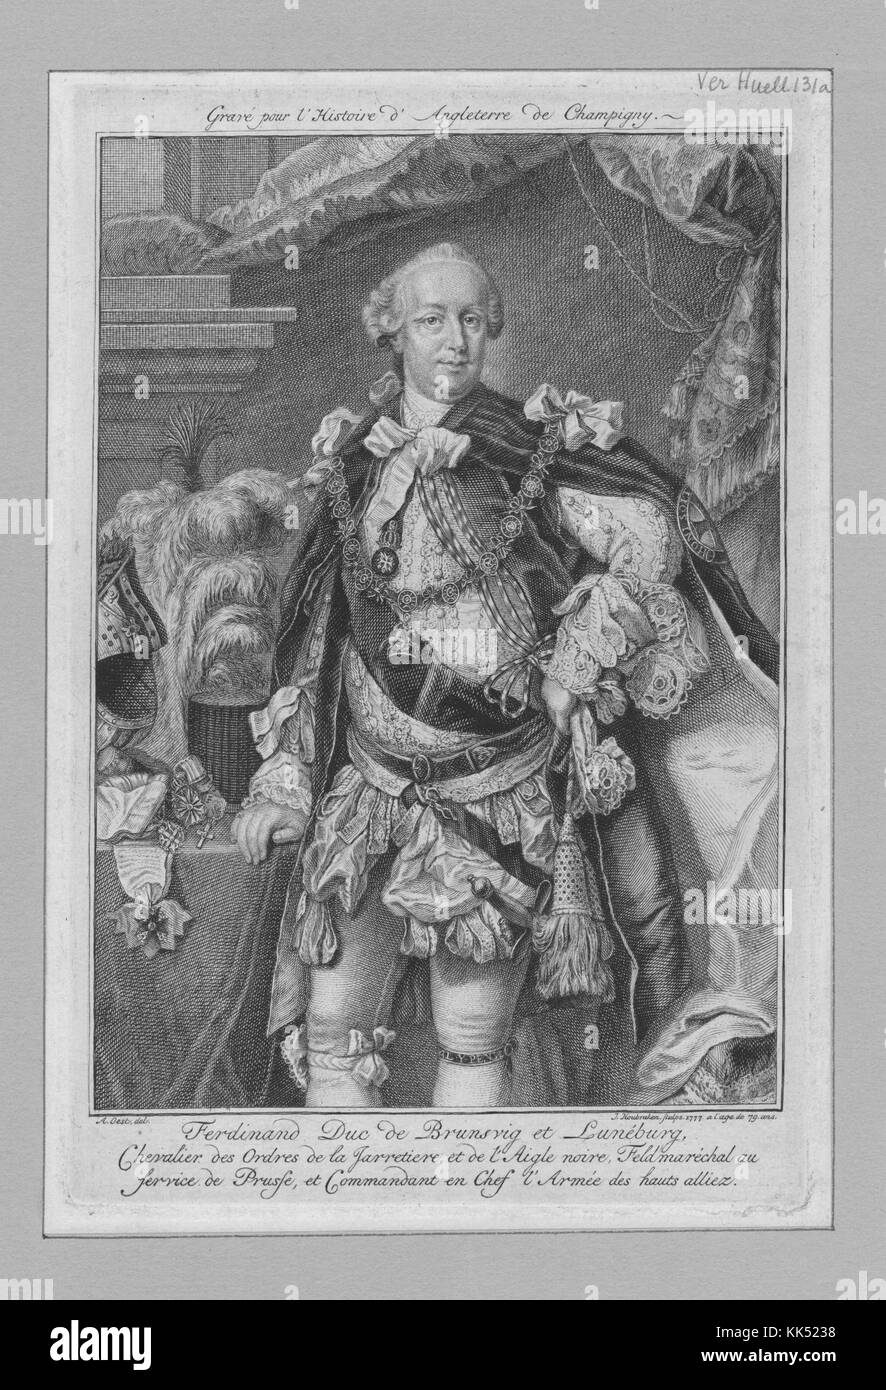 An engraving from a portrait of Prince Ferdinand of Brunswick, he was a highly successful field marshal in the German-Prussian military, he is most remembered for his contributions during the Seven Years' War, 1777. From the New York Public Library. Stock Photo